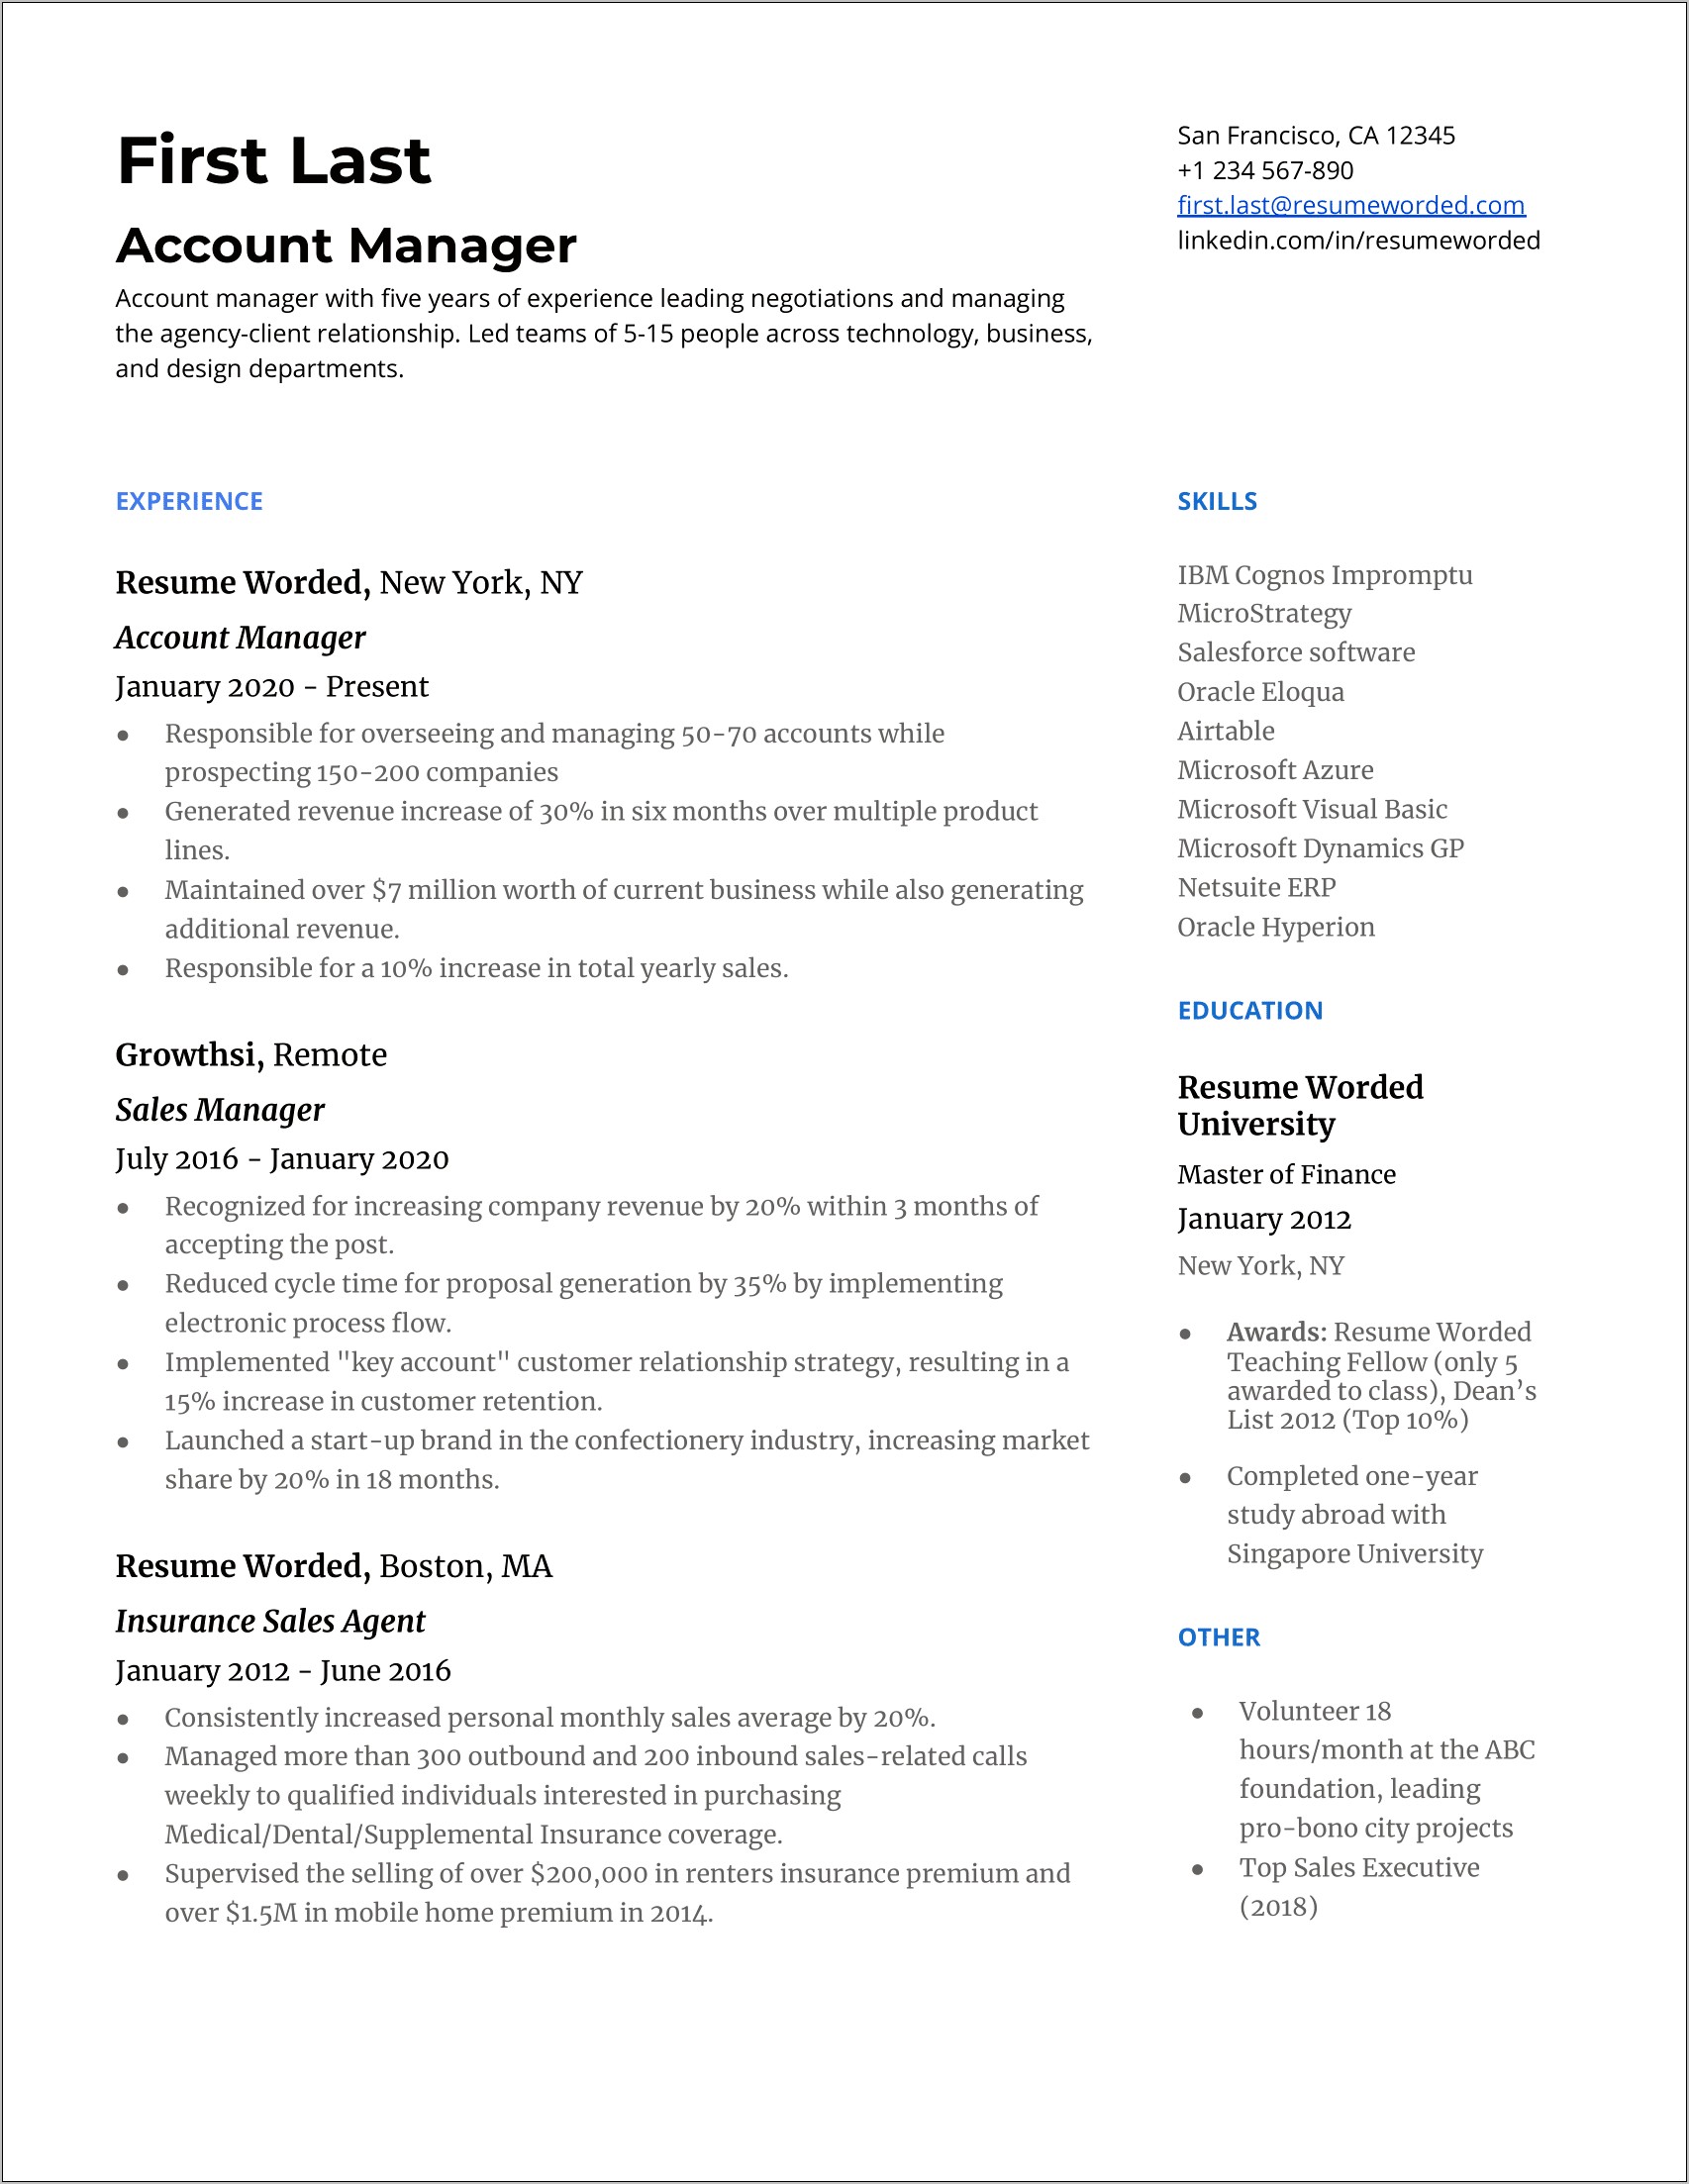 Example Resume Summary In 300 Words